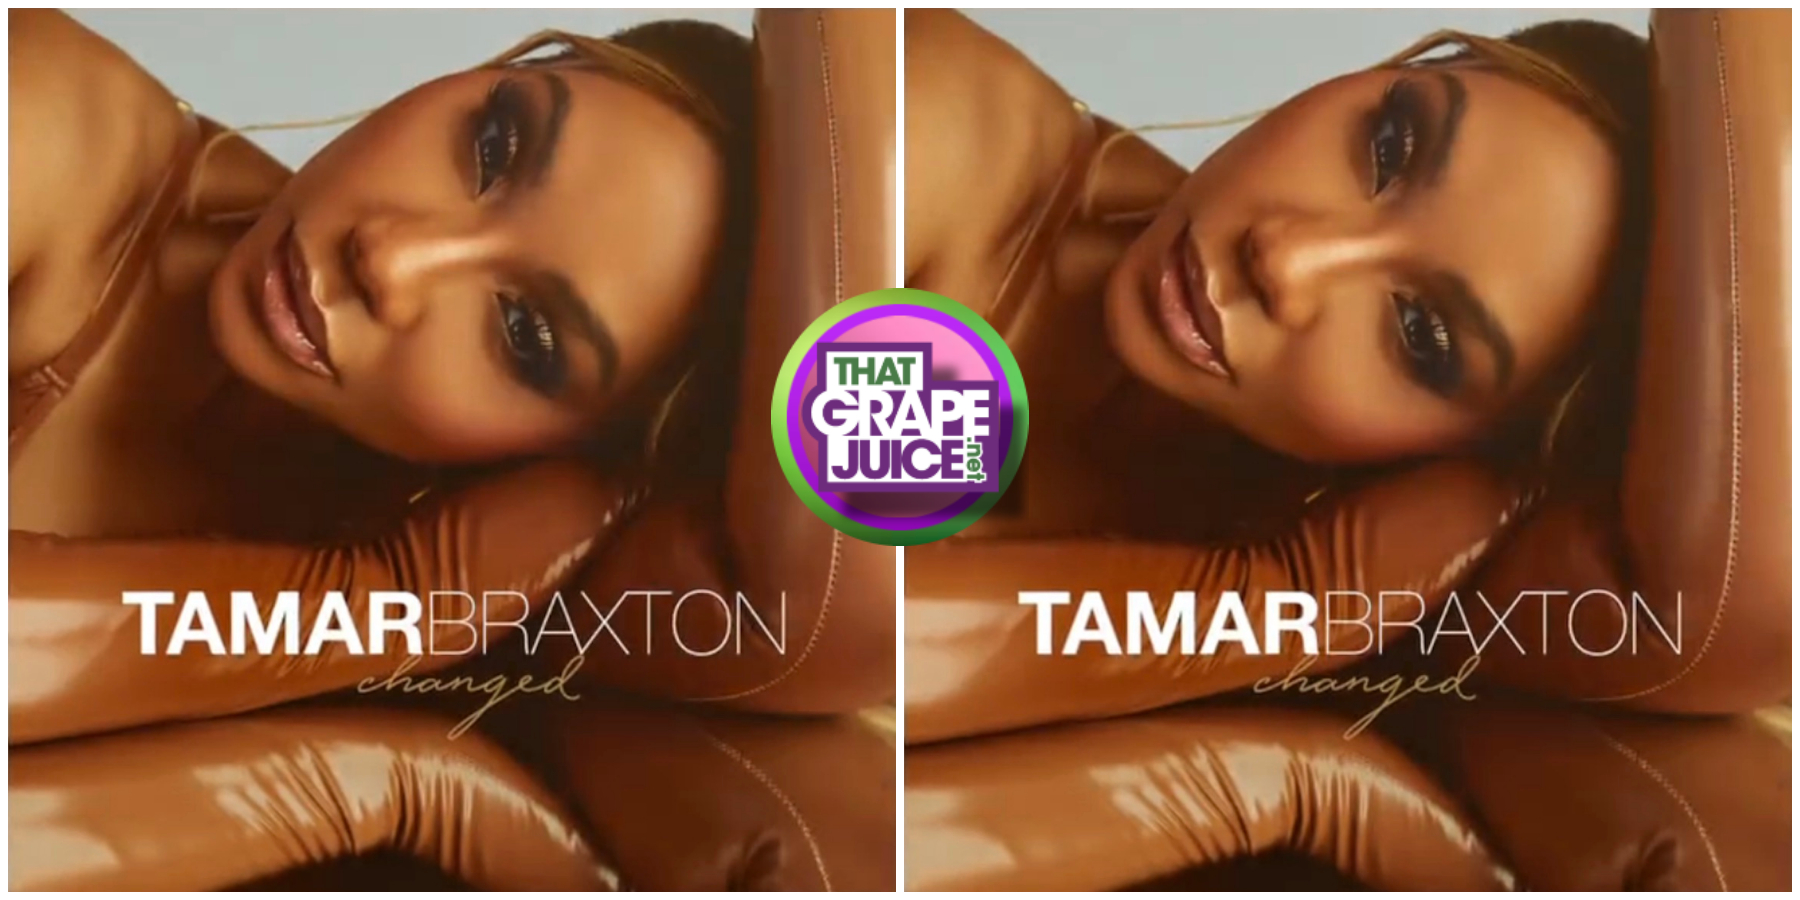 New Song Tamar Braxton 'Changed' That Grape Juice